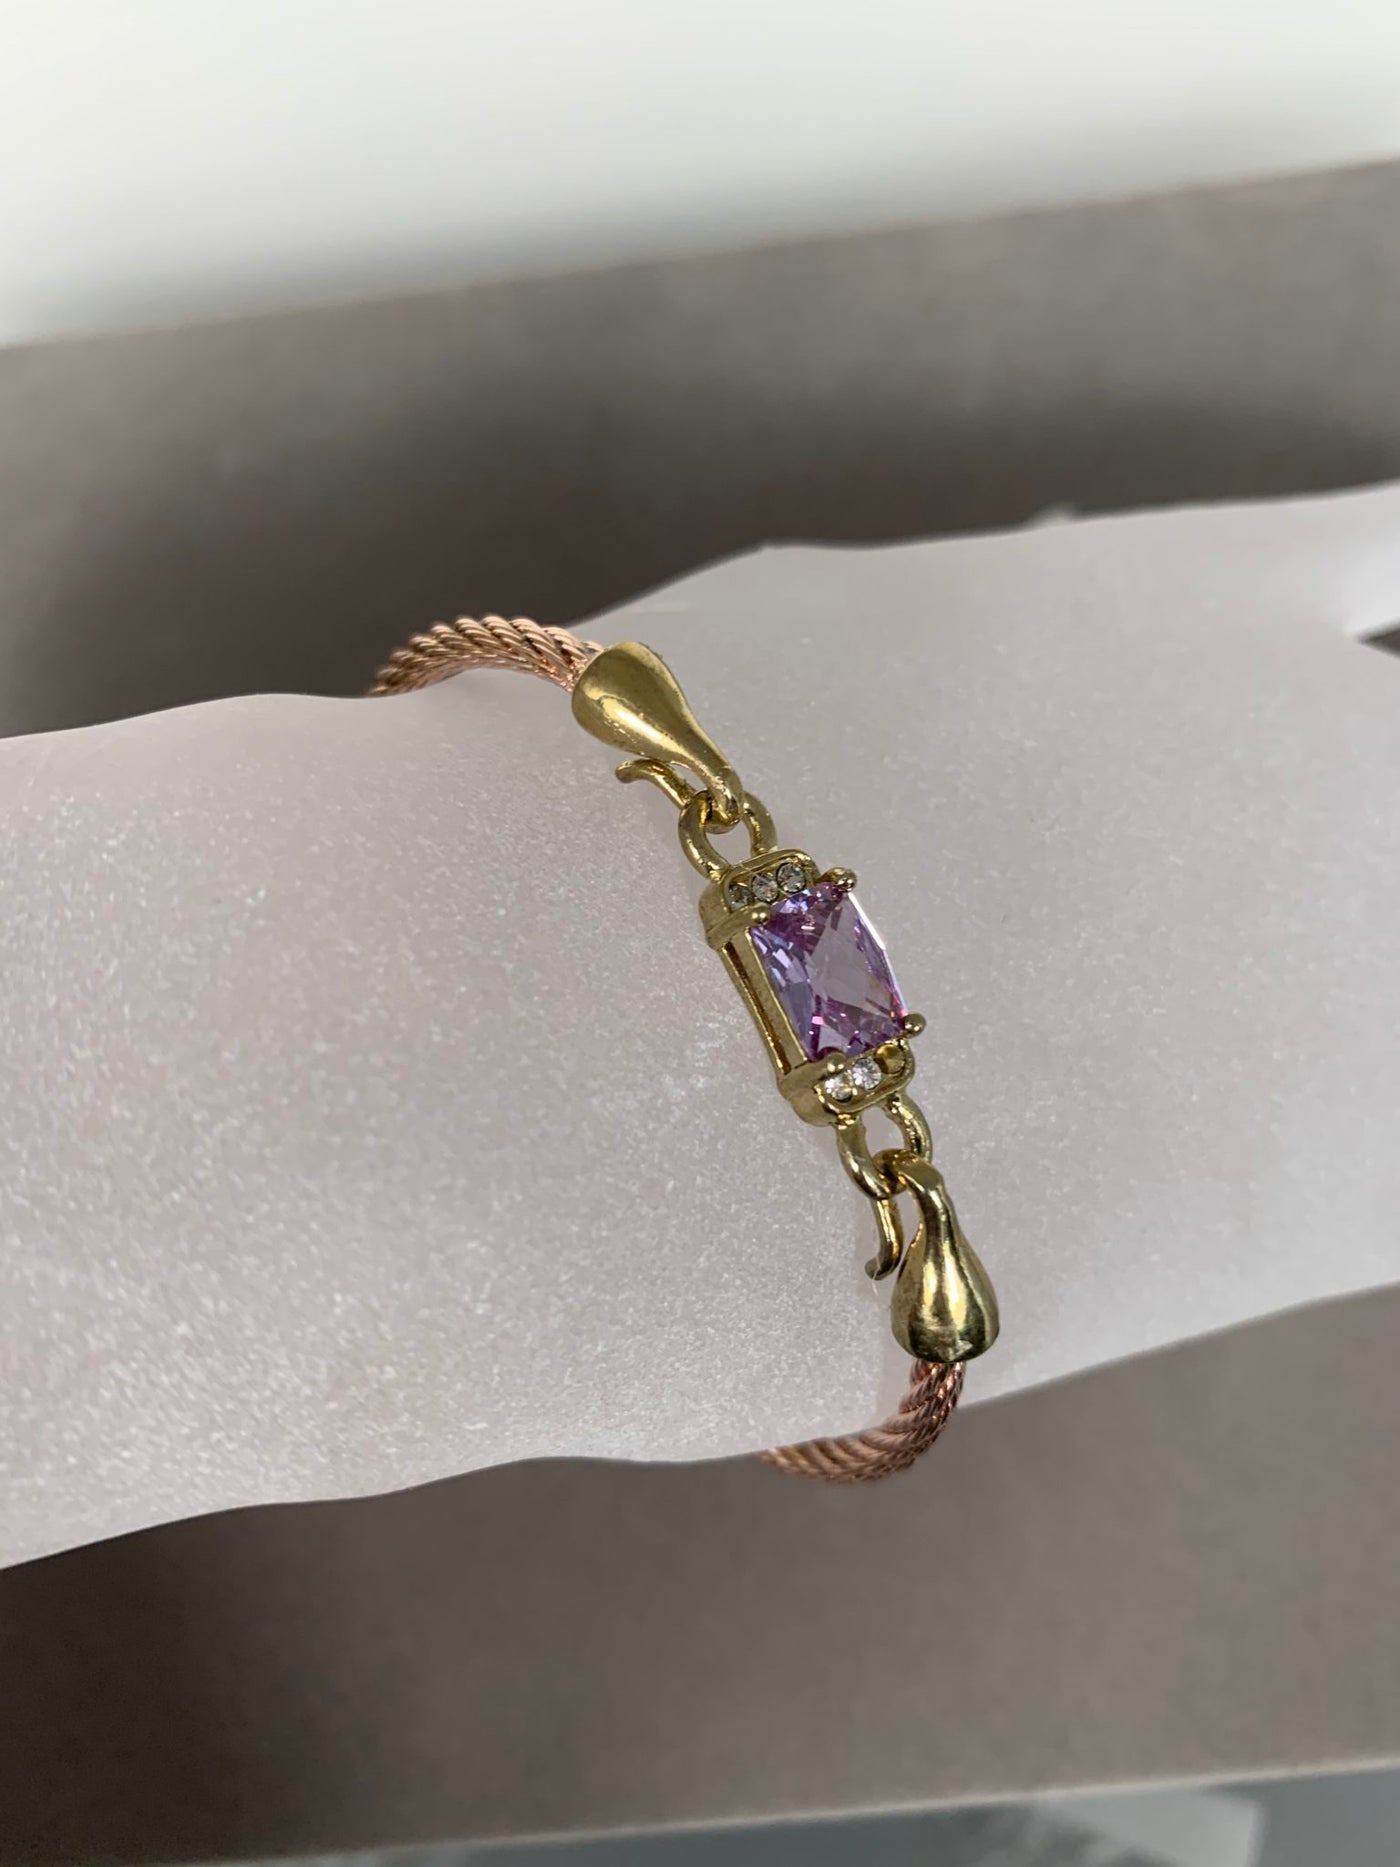 Rose Gold Tone Wire Bangle Bracelet featuring Purple Crystal